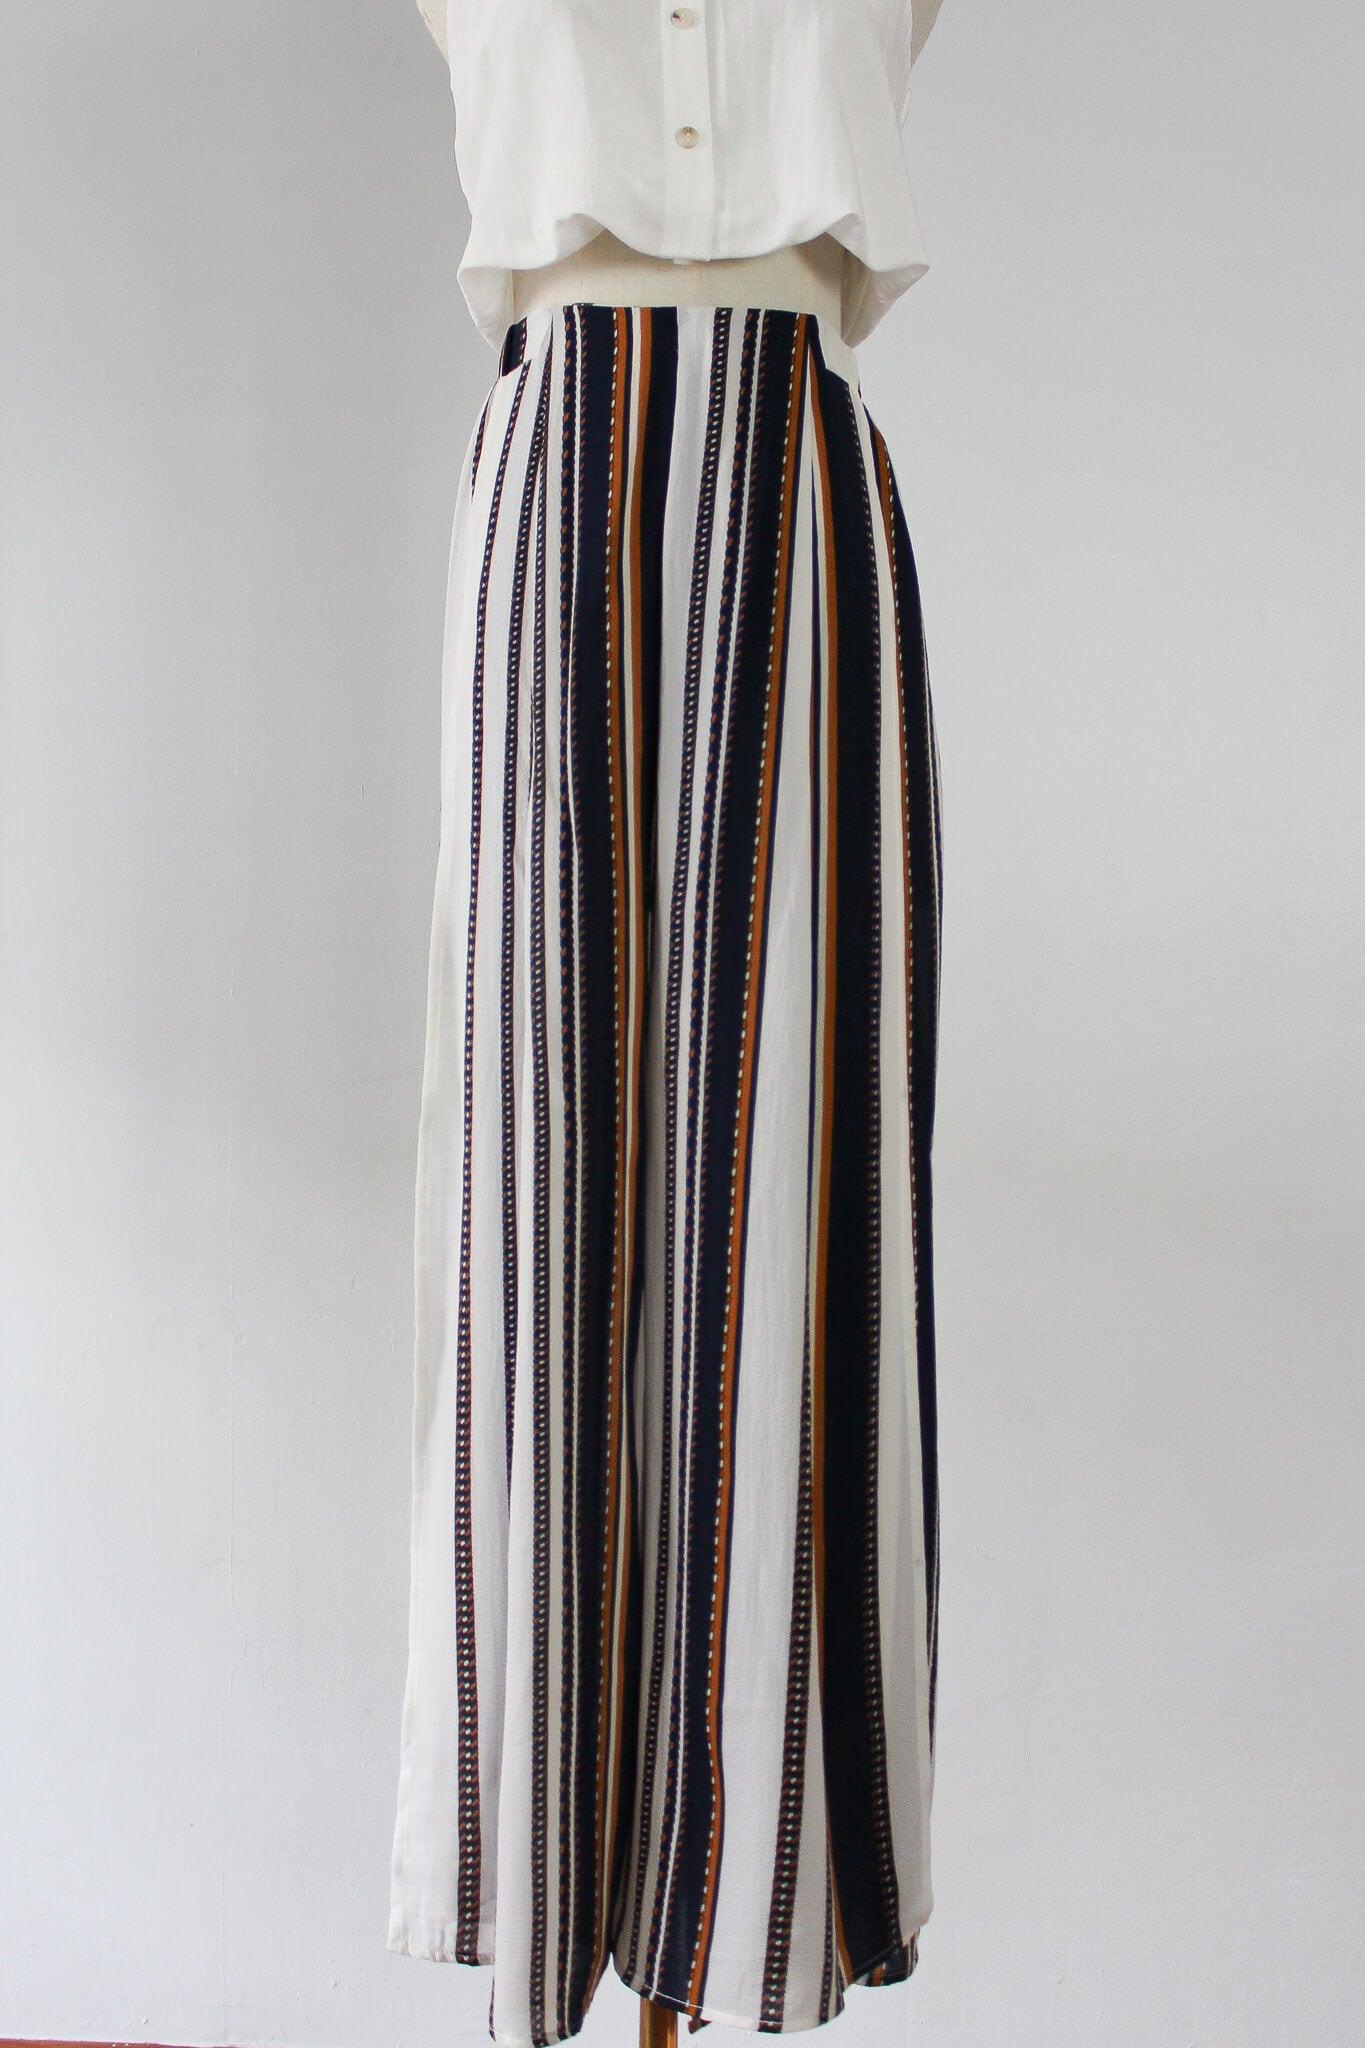 Striped high waist wide leg pants with side split, accentuates legs. Perfect for casual summer wear